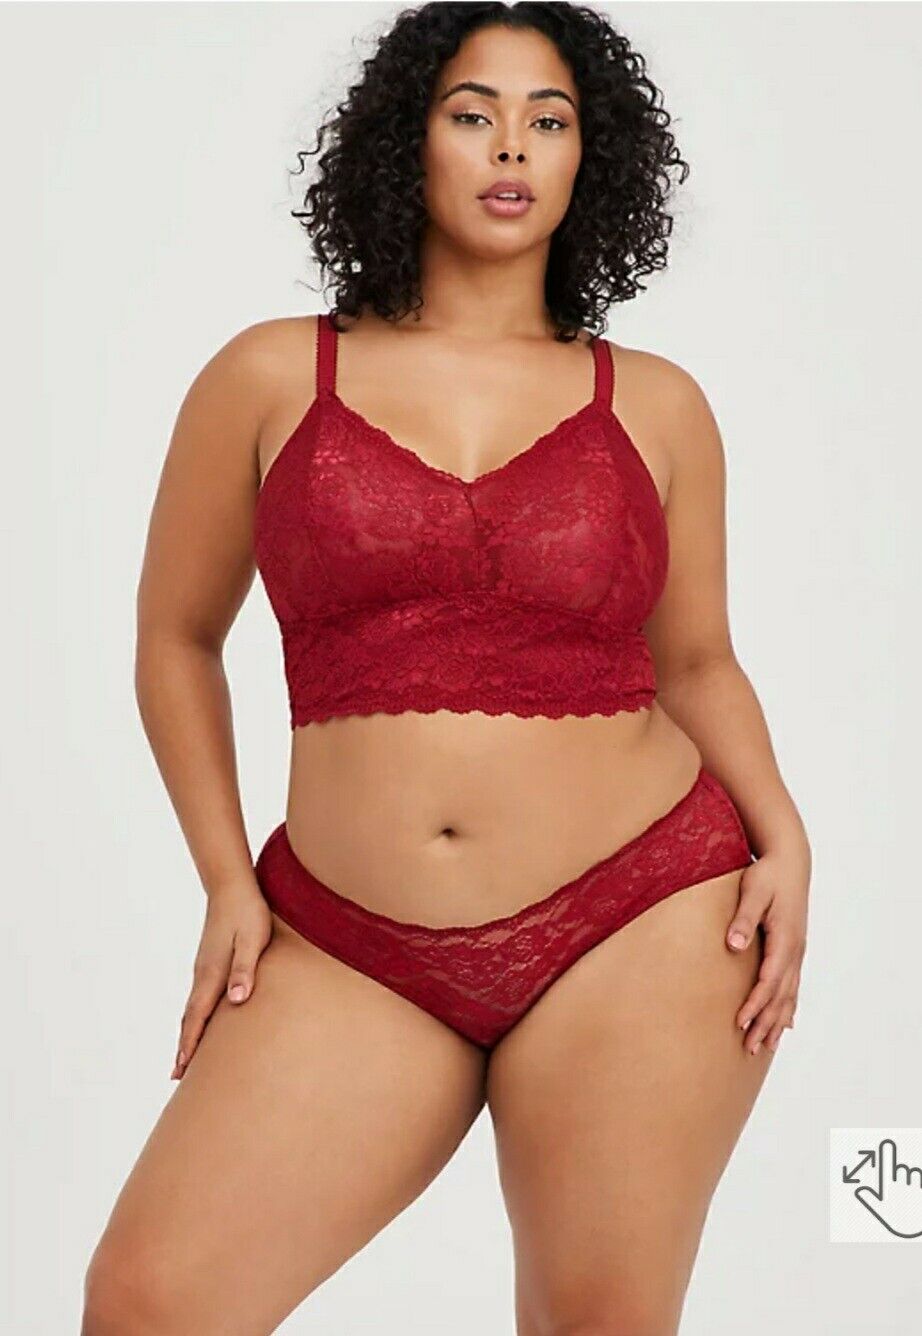 Matching Lace Bra and Panty Set, Get 30% off, Snazzyway